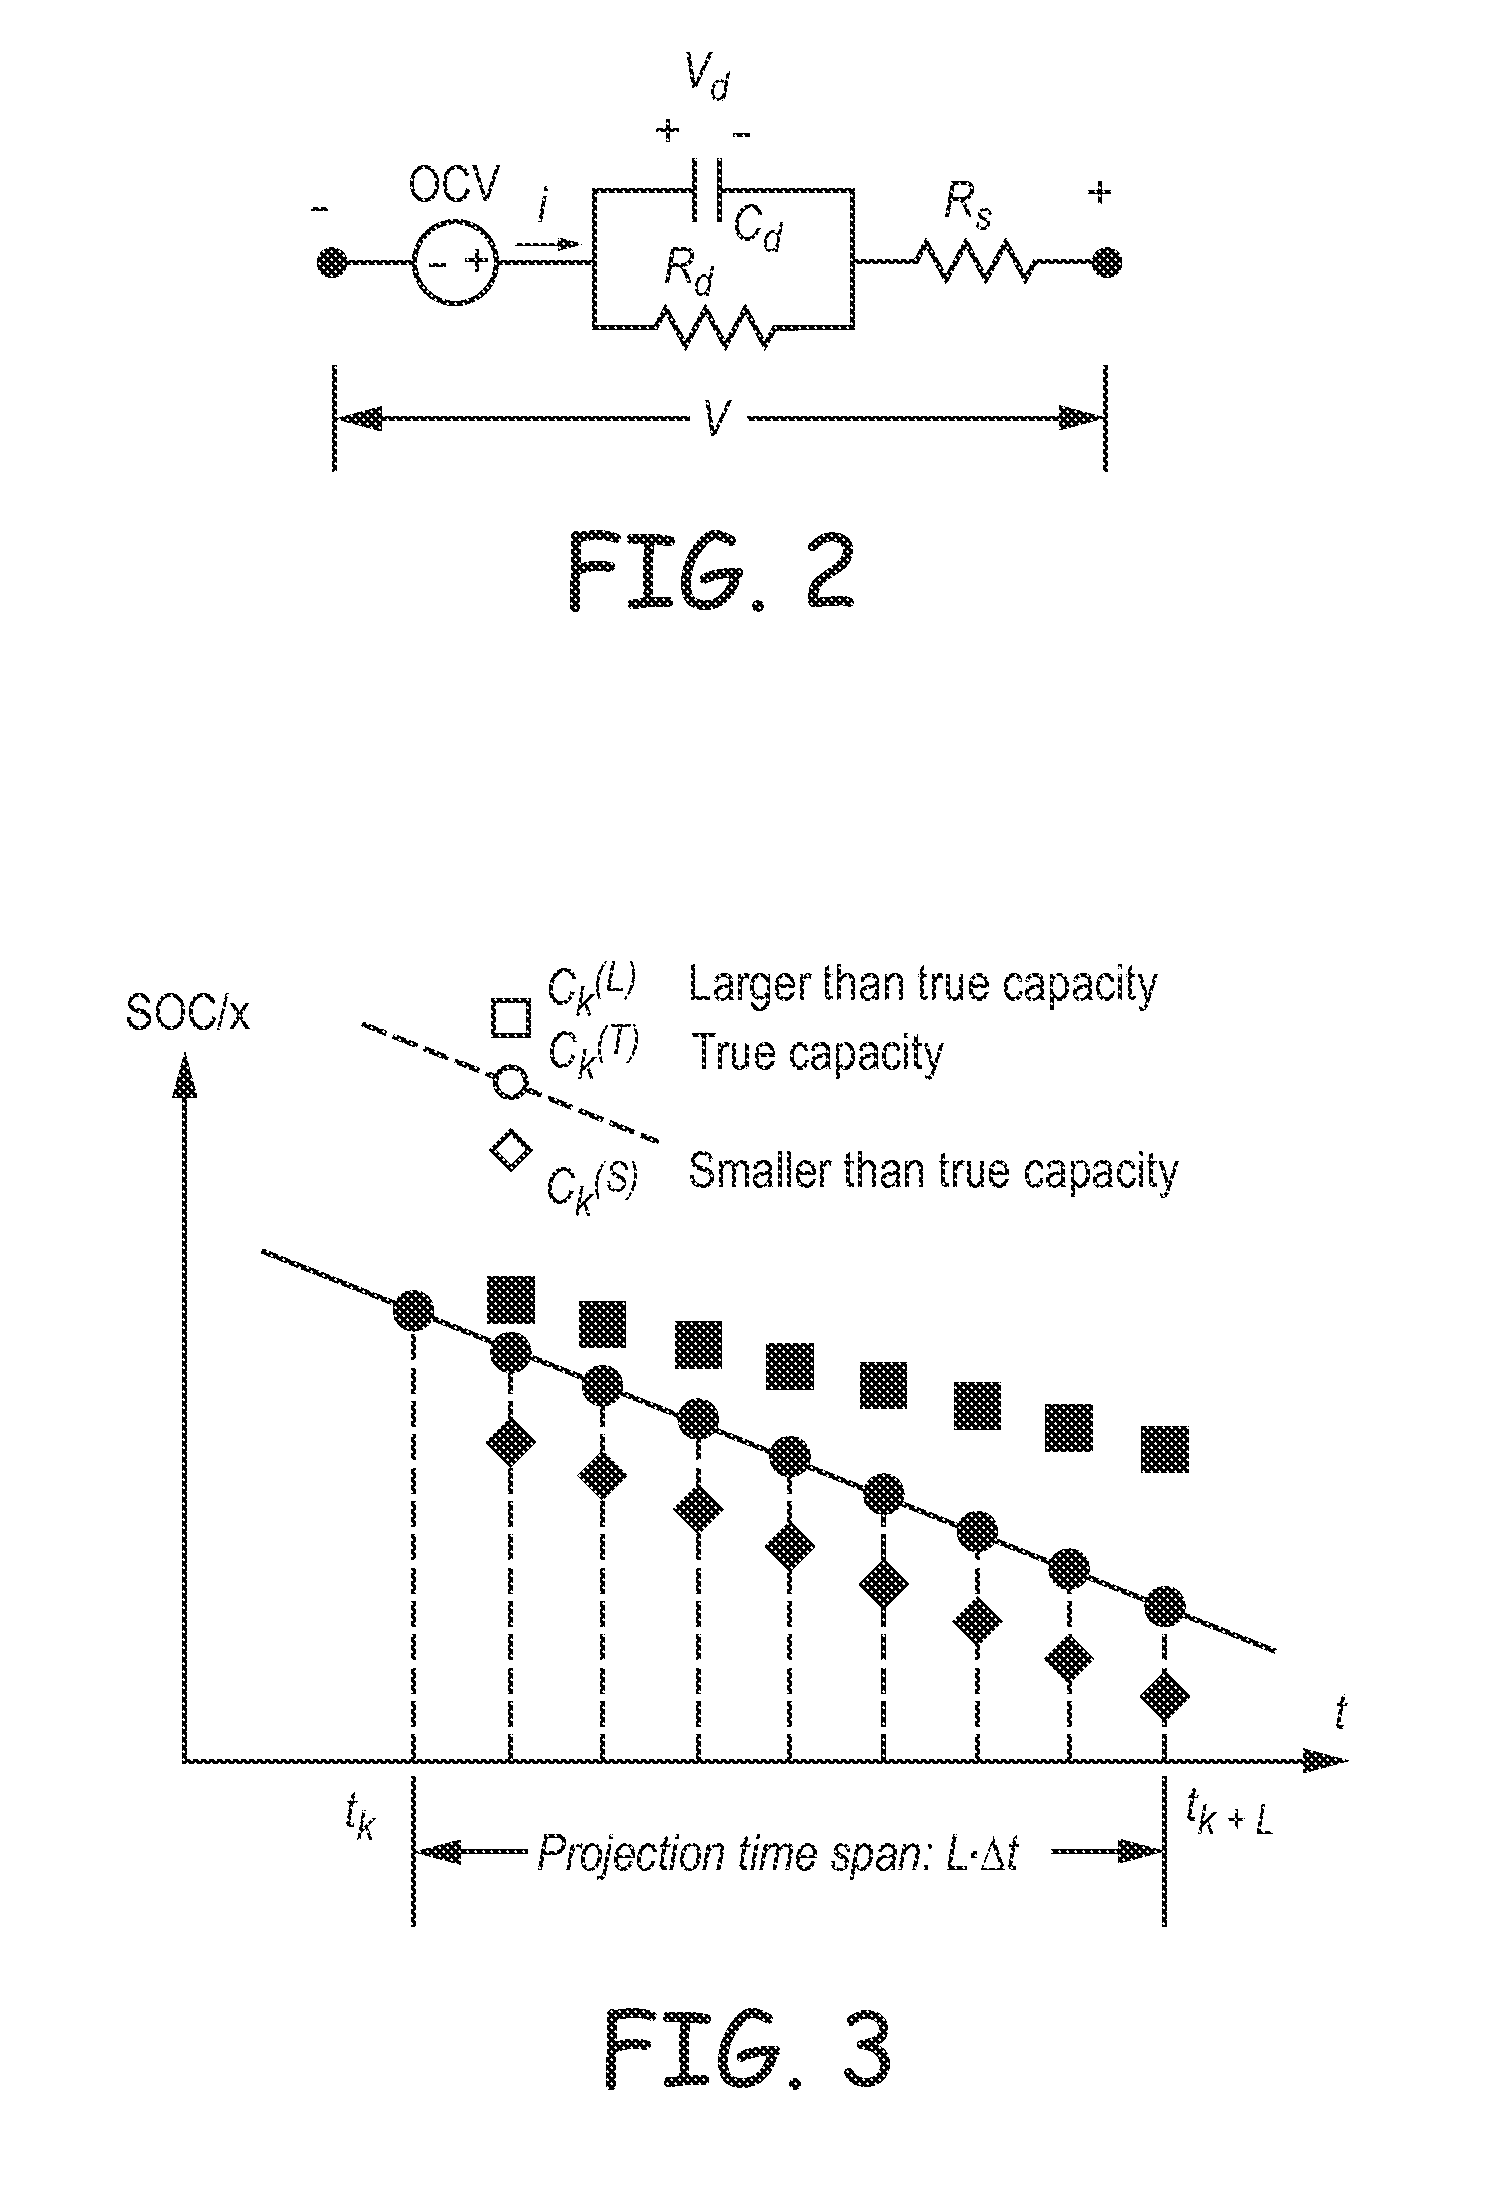 Method and System for Predicting Useful Life of a Rechargeable Battery